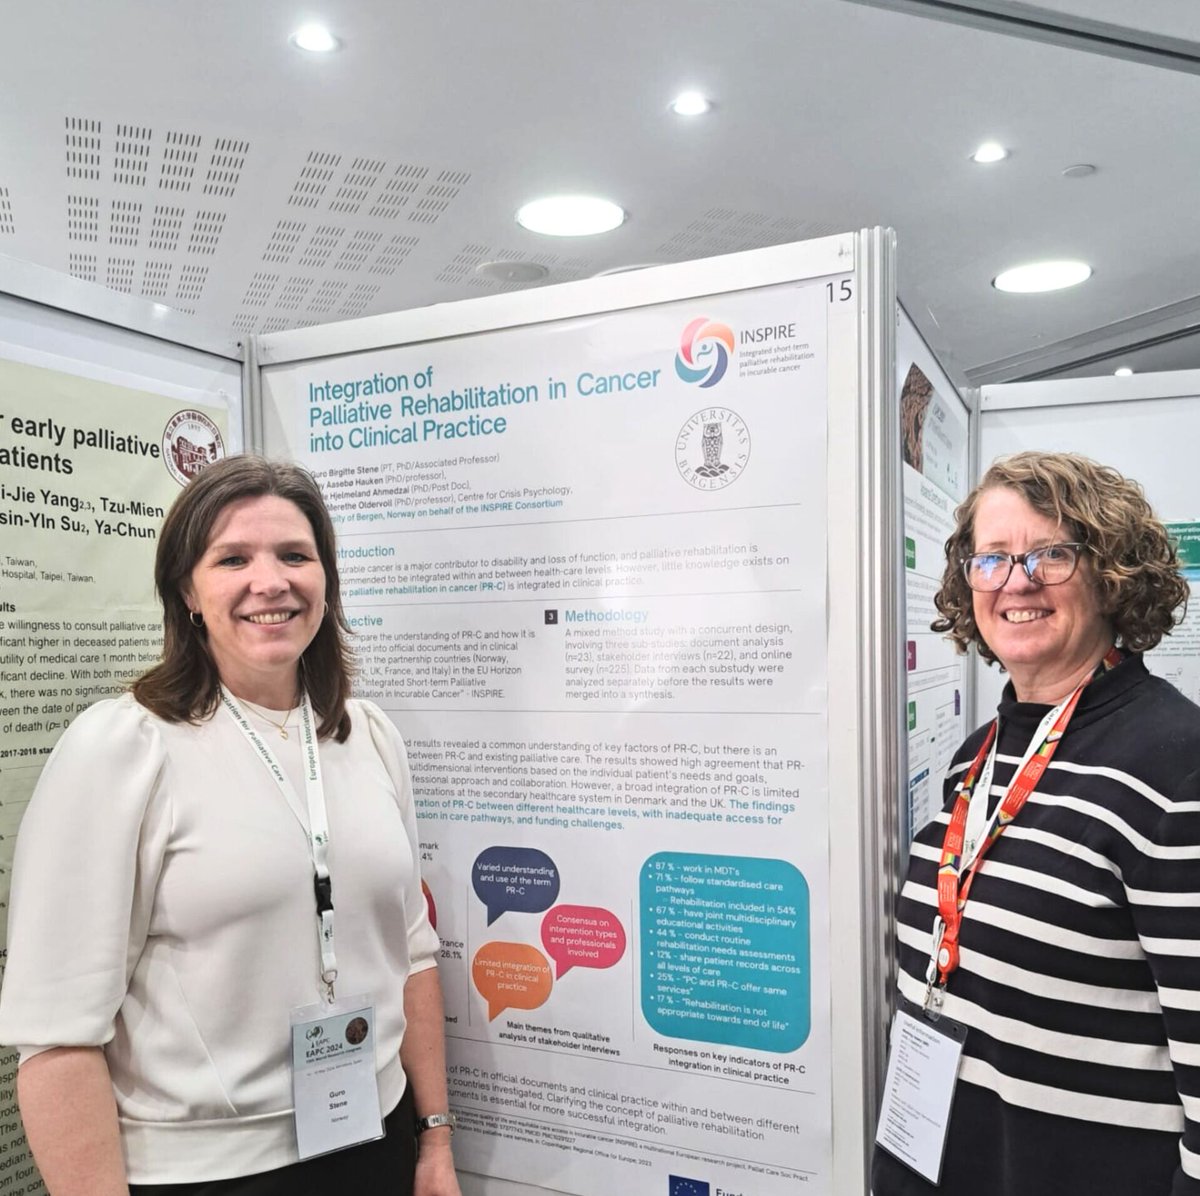 'Little knowledge exists on how palliative rehabilitation in cancer is integrated in clinical practice'...

Viewing our WP1 poster from the EAPC World Research Congress 2024 in Barcelona, plus more useful resources here: palliativeprojects.eu/inspire/resour…

#palliativerehab #HealthinEurope